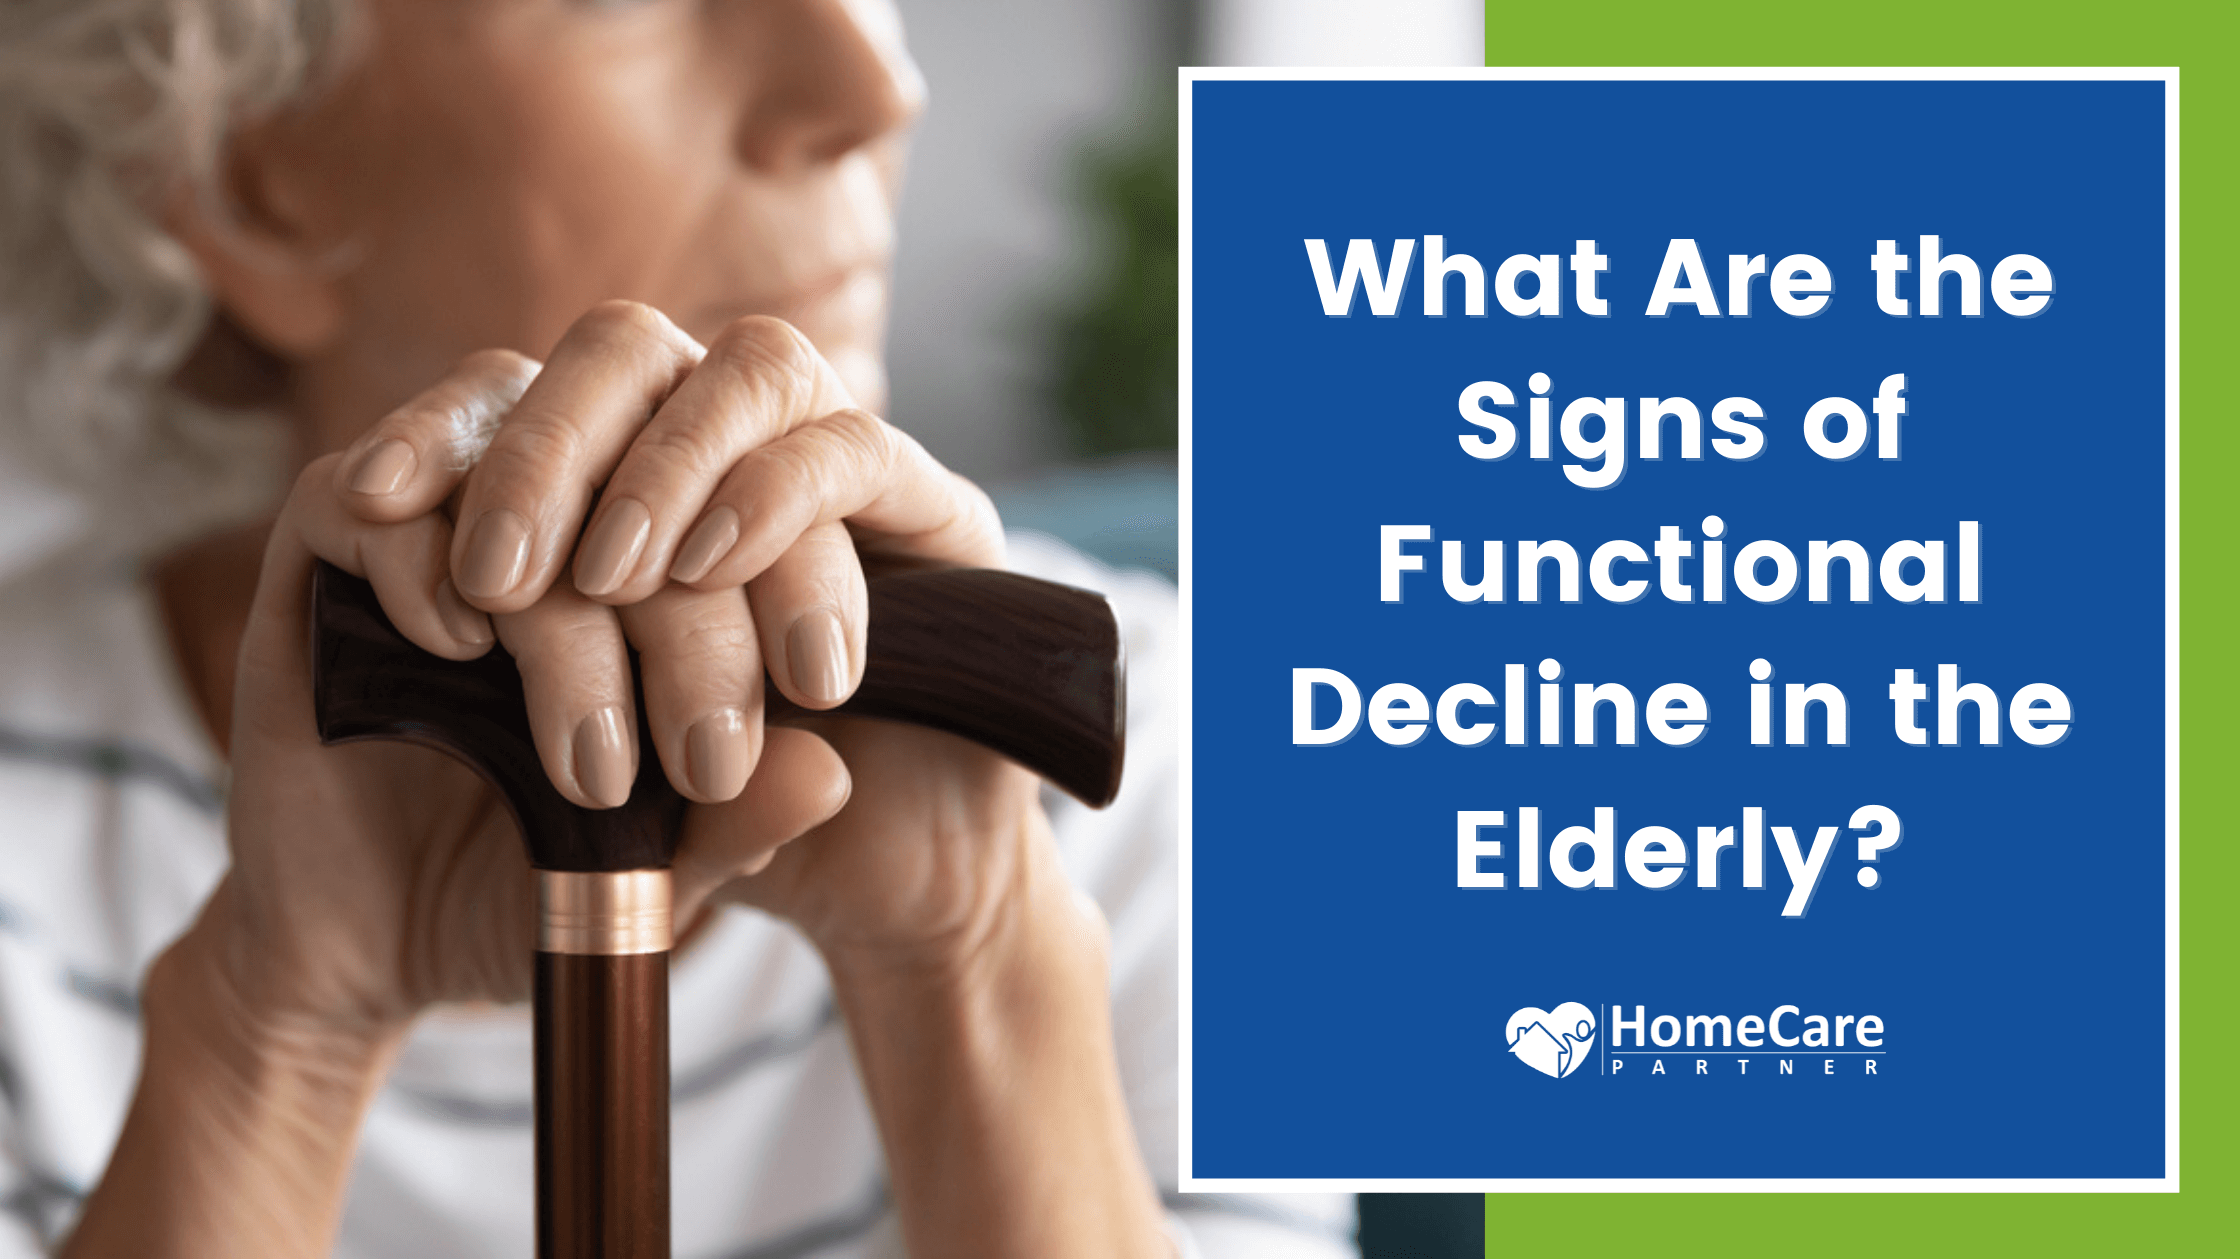 What Are the Signs of Functional Decline in the Elderly?